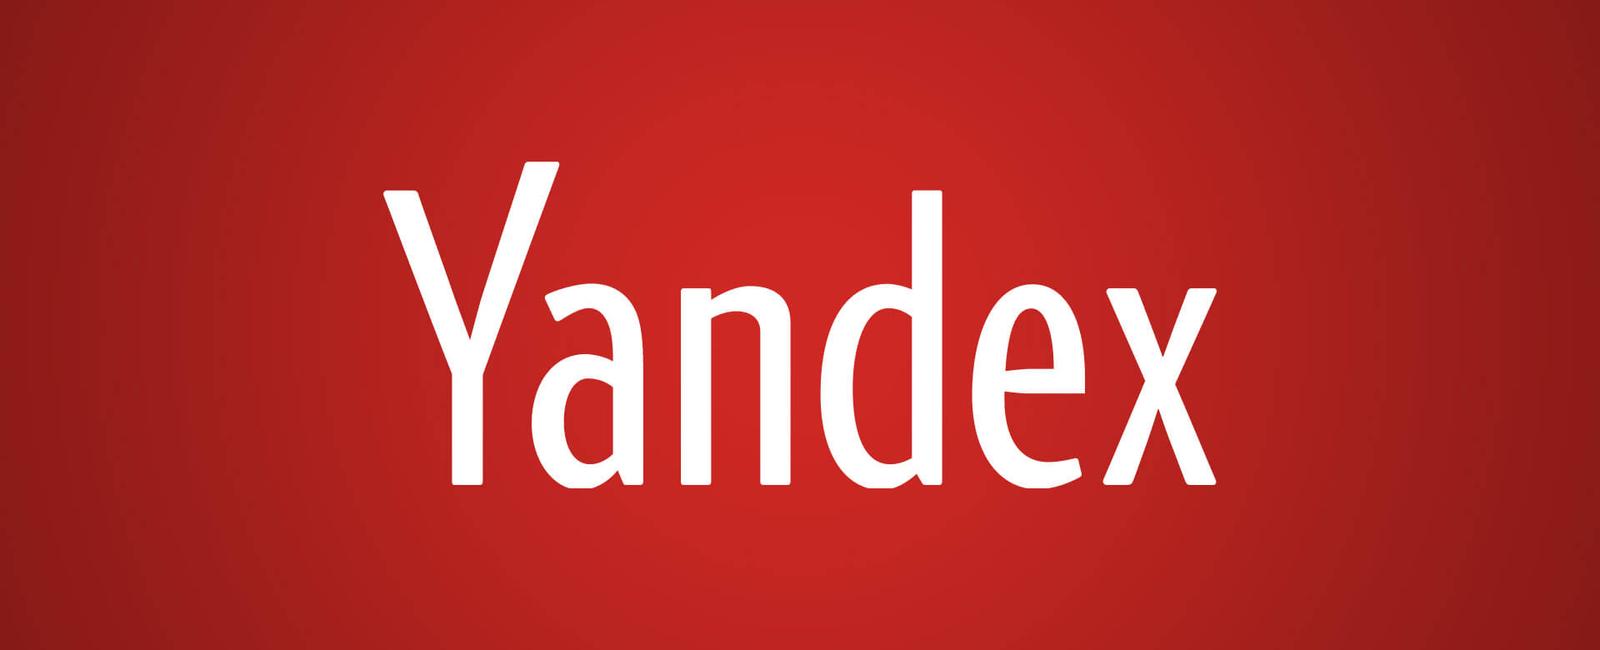 Yandex added free blocking of annoying calls from unknown to its caller ID